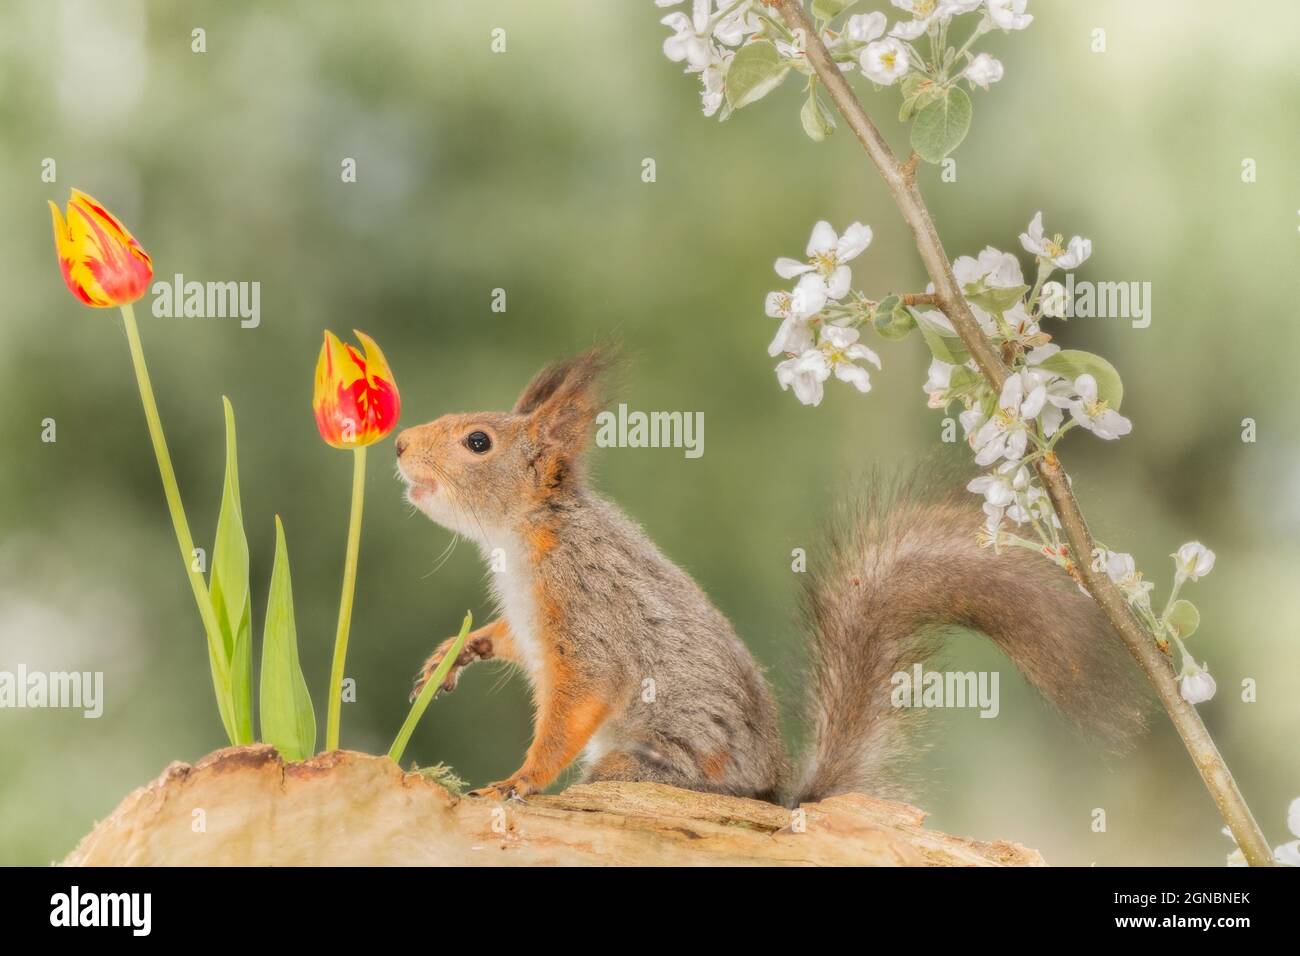 close up of  red squirrel  looking at tulip flowers standing below  apple branches with blossoms Stock Photo